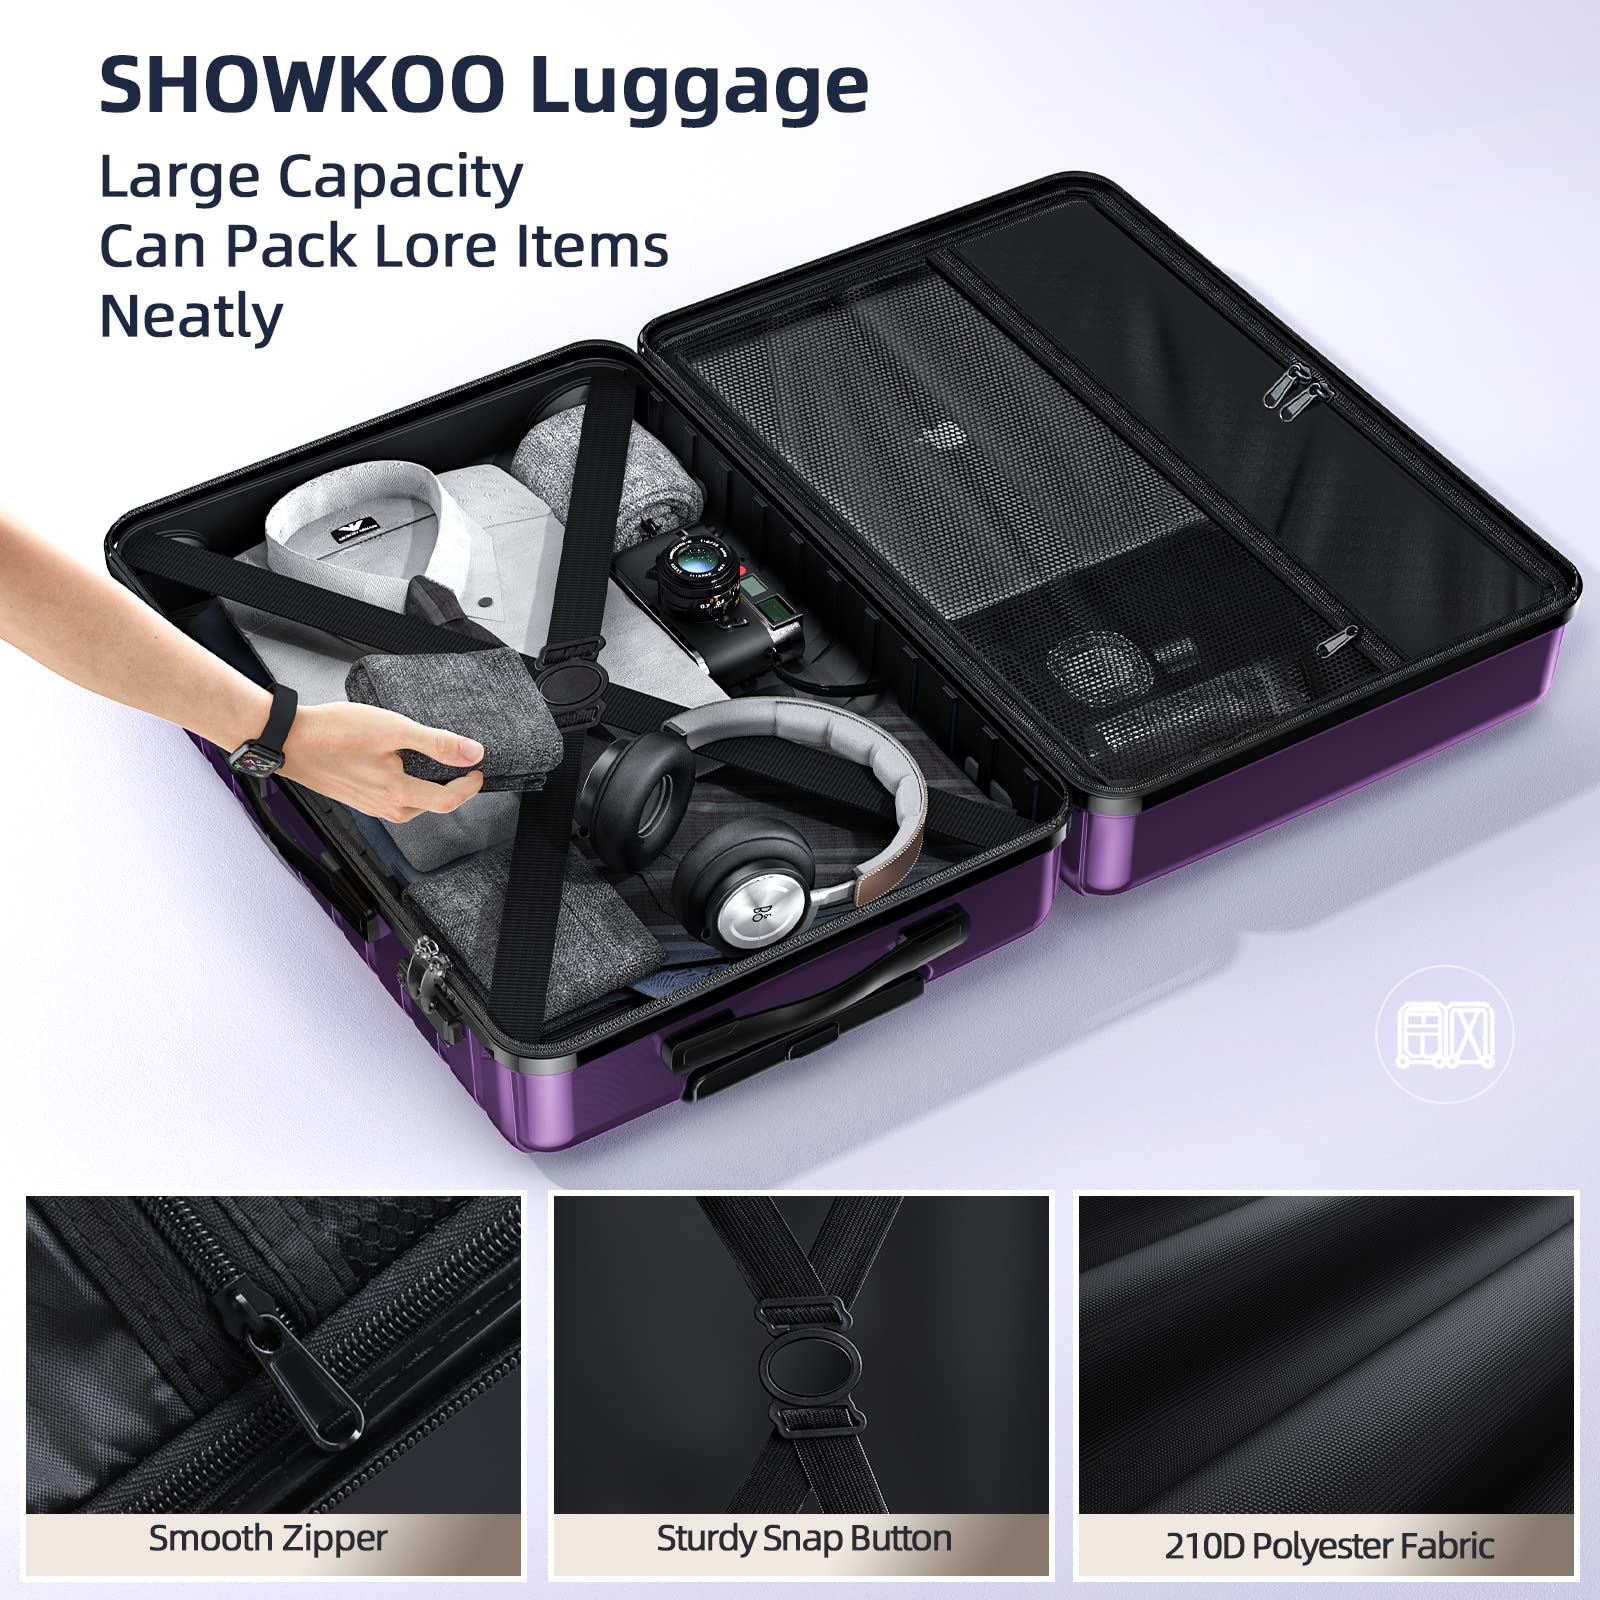 SHOWKOO Luggage Sets Expandable ABS Hardshell 3pcs Clearance Luggage Hardside Lightweight Durable Suitcase sets Spinner Wheels Suitcase with TSA Lock (Purple)